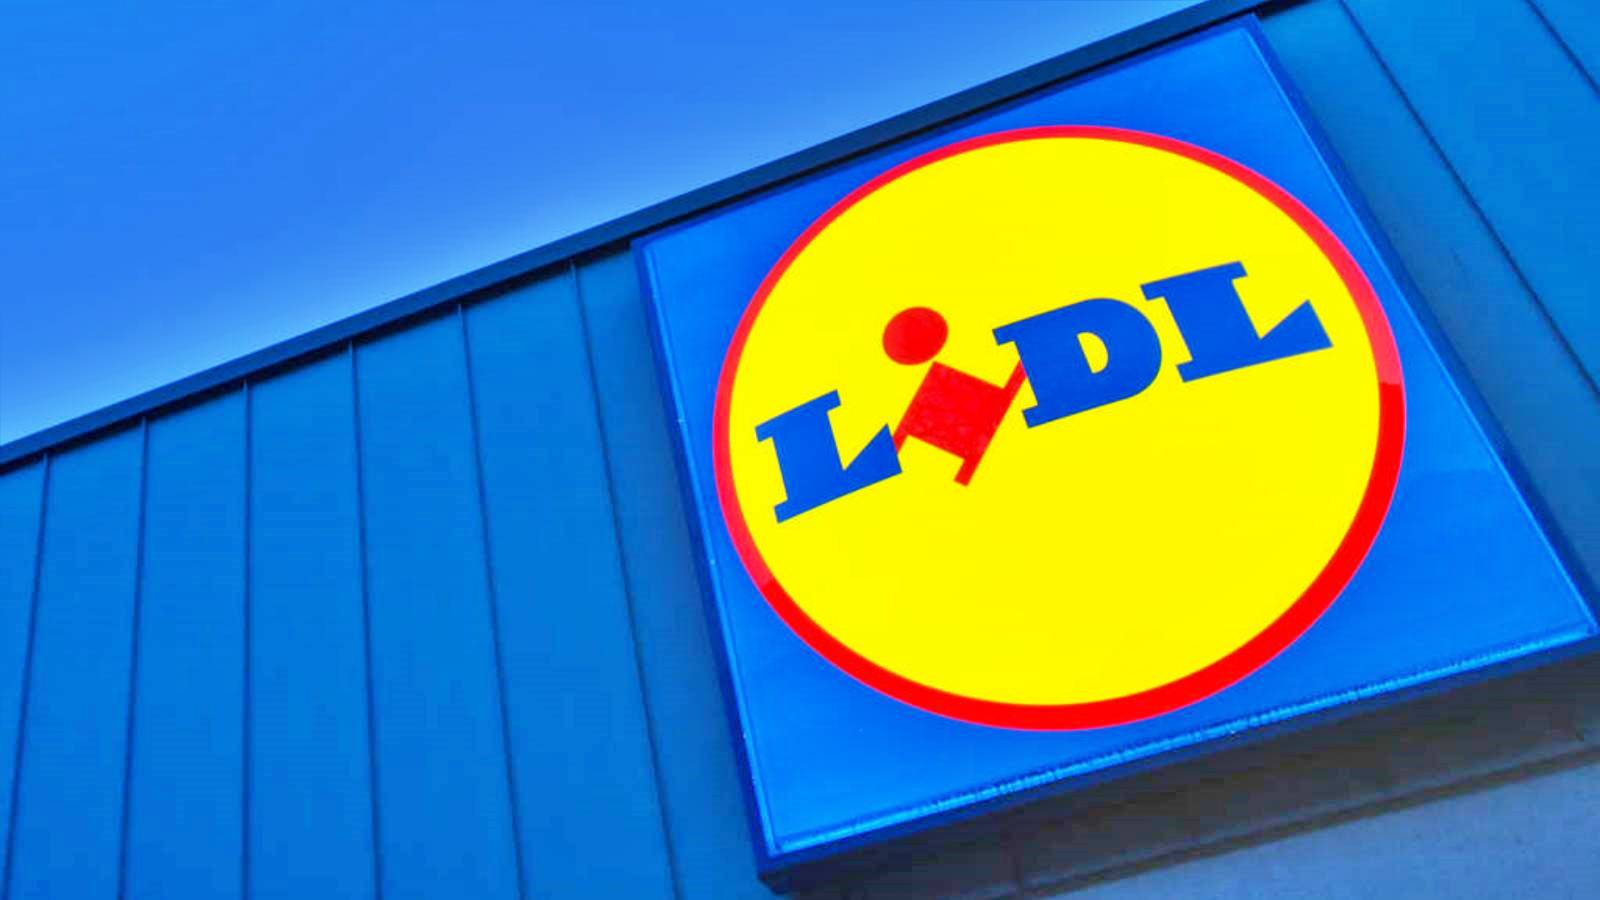 LIDL Romania Official Offers FREE Christmas to Customers